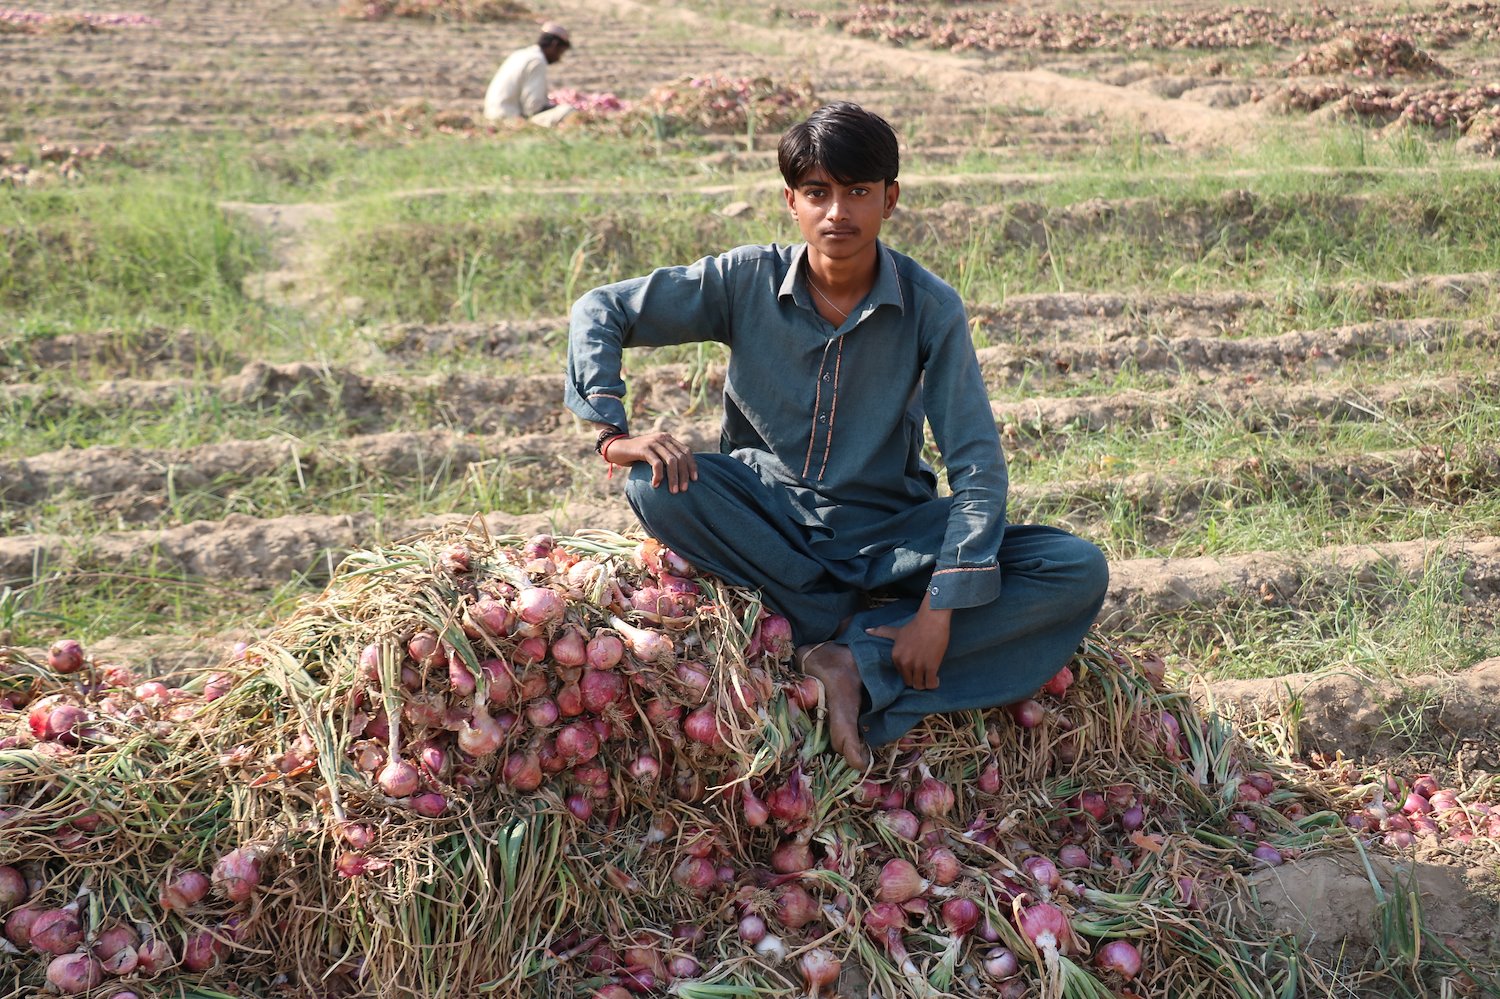 Young man sitting on pile of red onions with field of crops in background